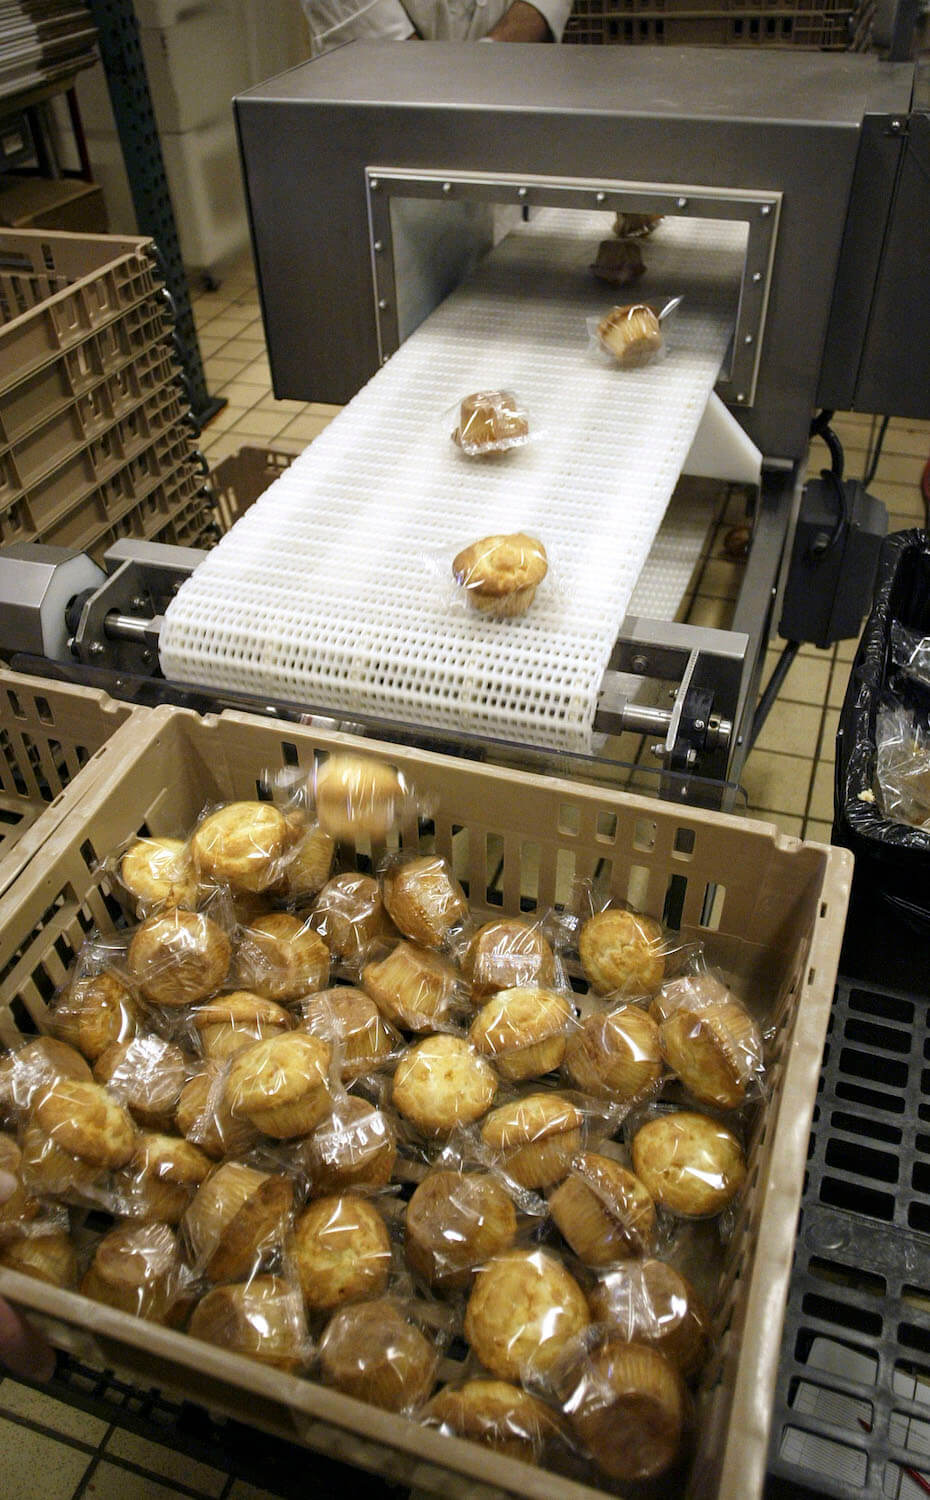 Freshly baked muffins are run through a metal detector, before they leave the Airway Heights Corrections Center Food Factory November 10, 2005 in Airway Heights, Washington.